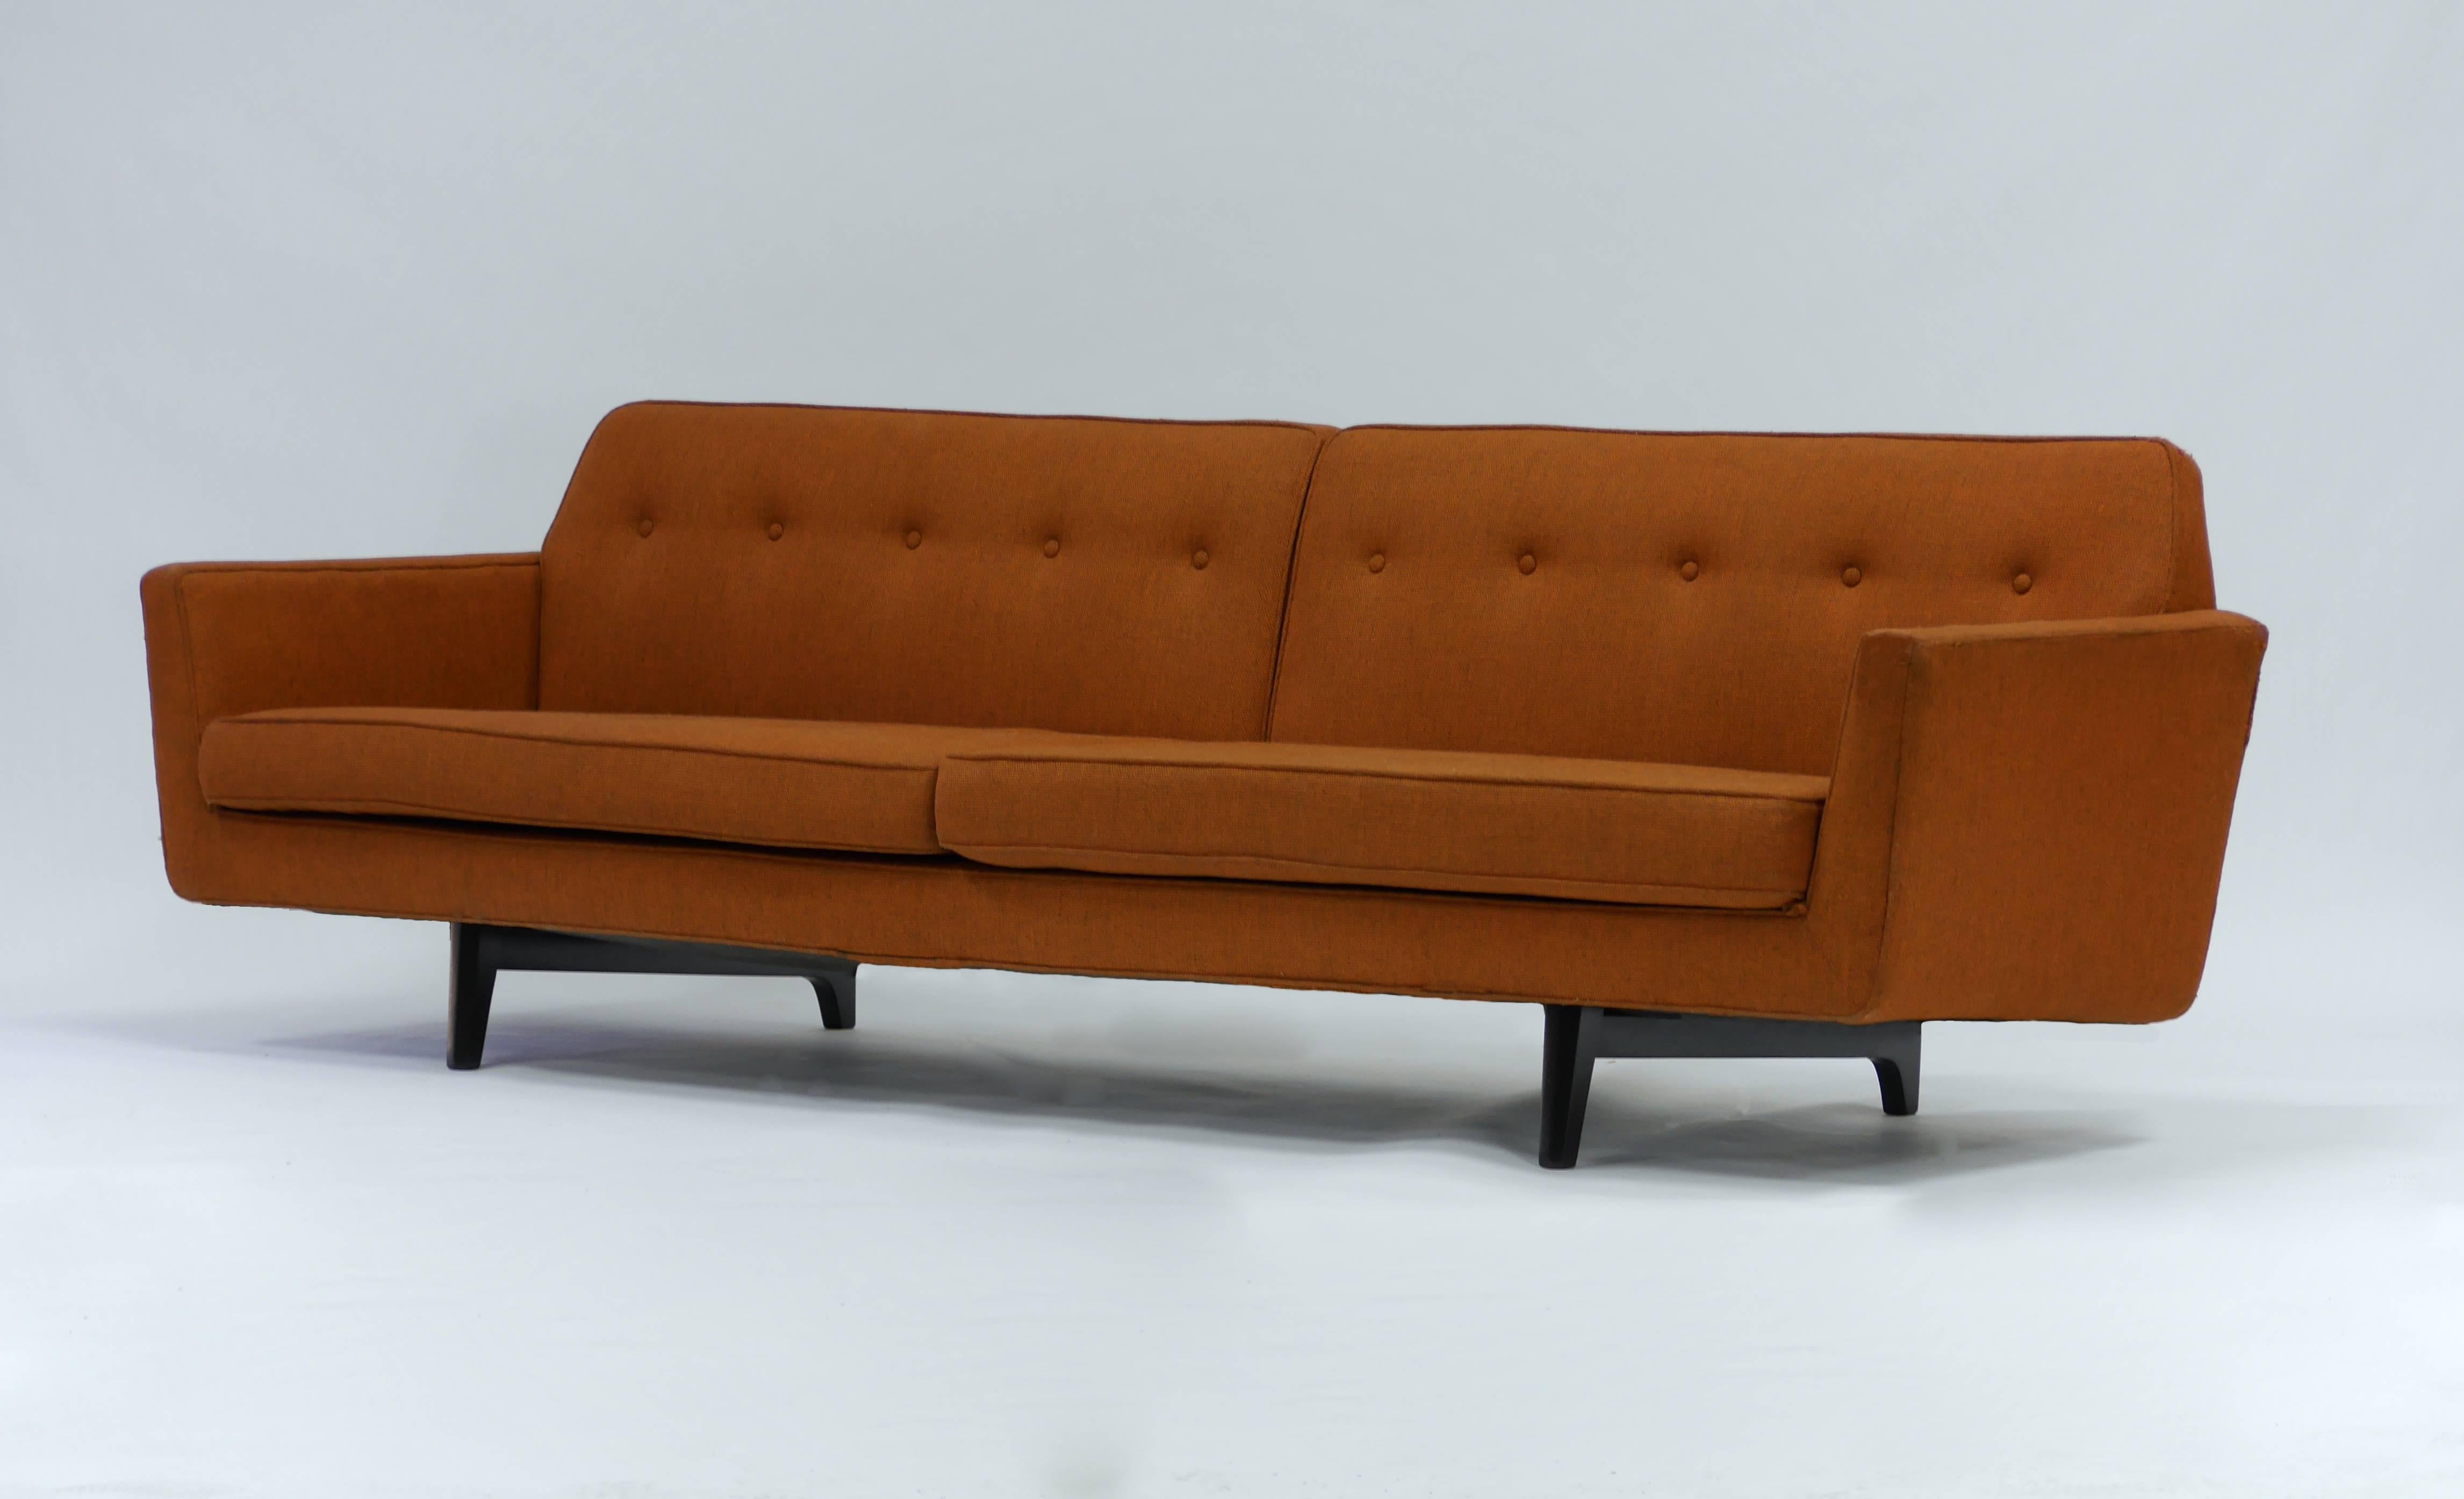 Pair of bracket back sofas by Edward Wormley for Dunbar. Original upholstery and wood elements have been refinished.